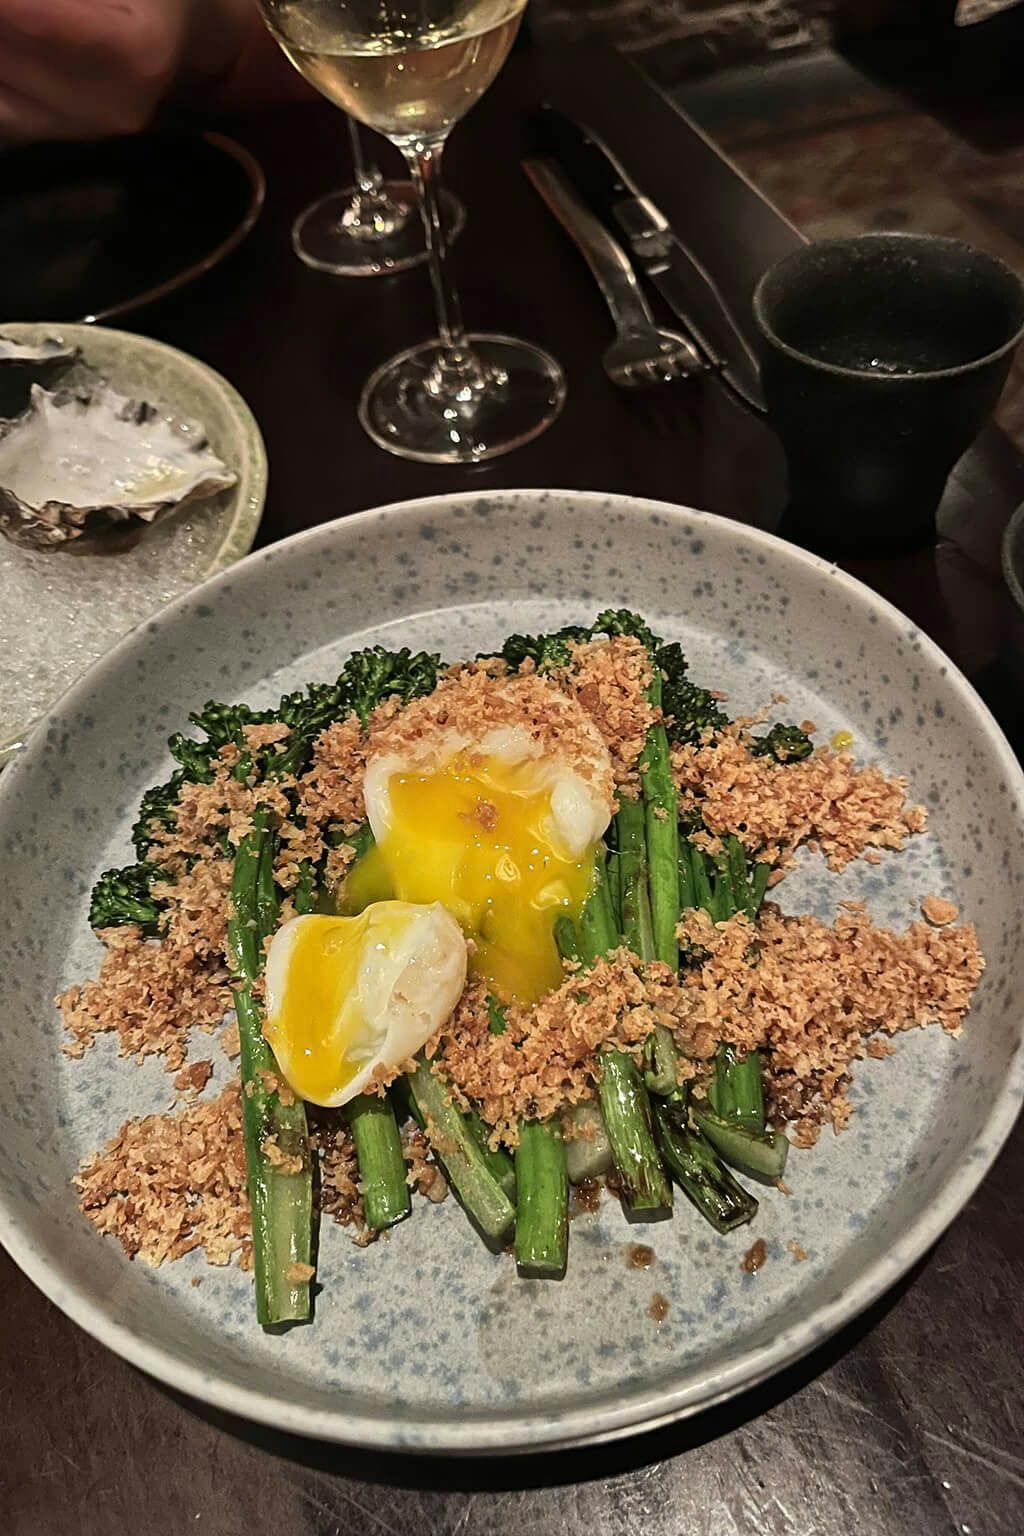 Grilled broccolini with charred soy sauce, poached egg, panko and tarragon.